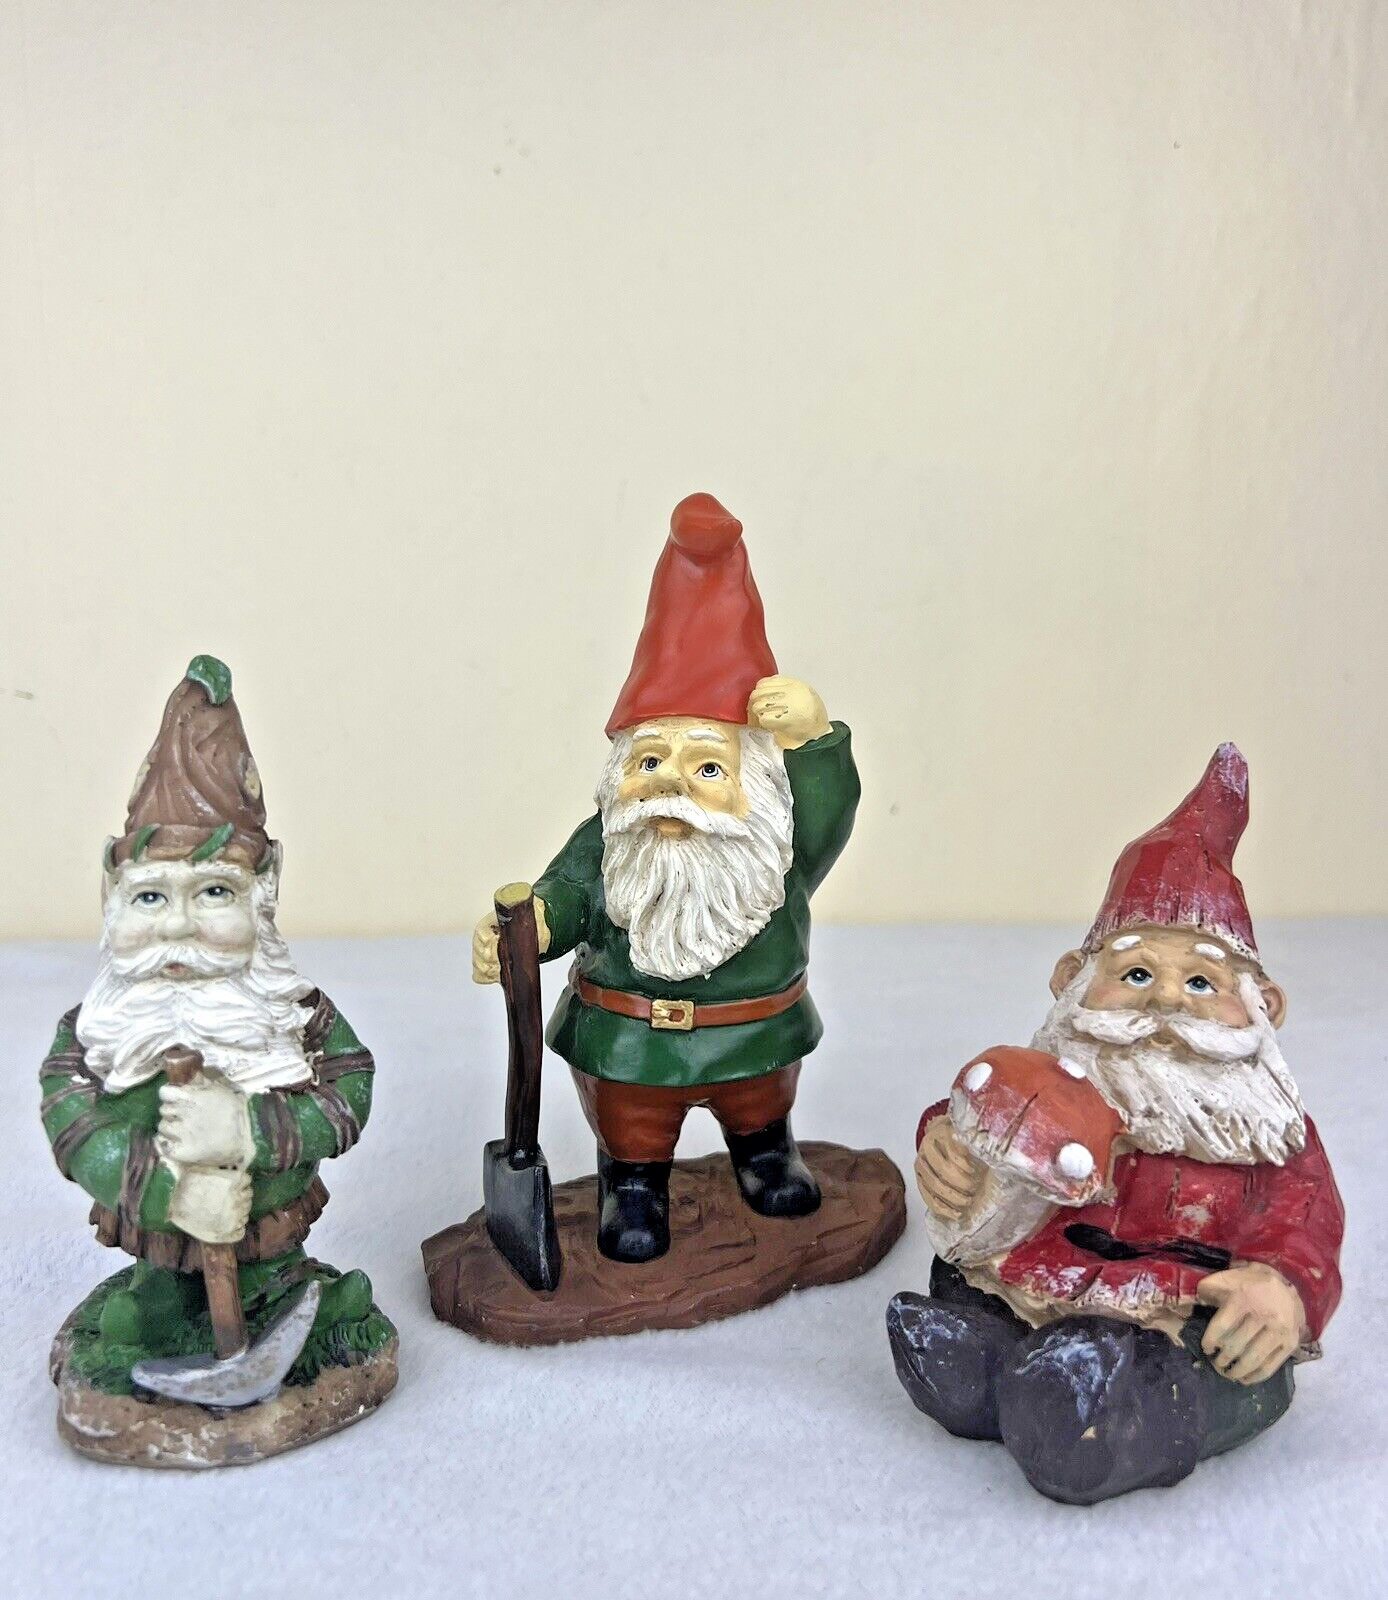 Lot Of 3 Vintage Resin Gnome Figurines Pointy Hats, Axes, Mushroom 6